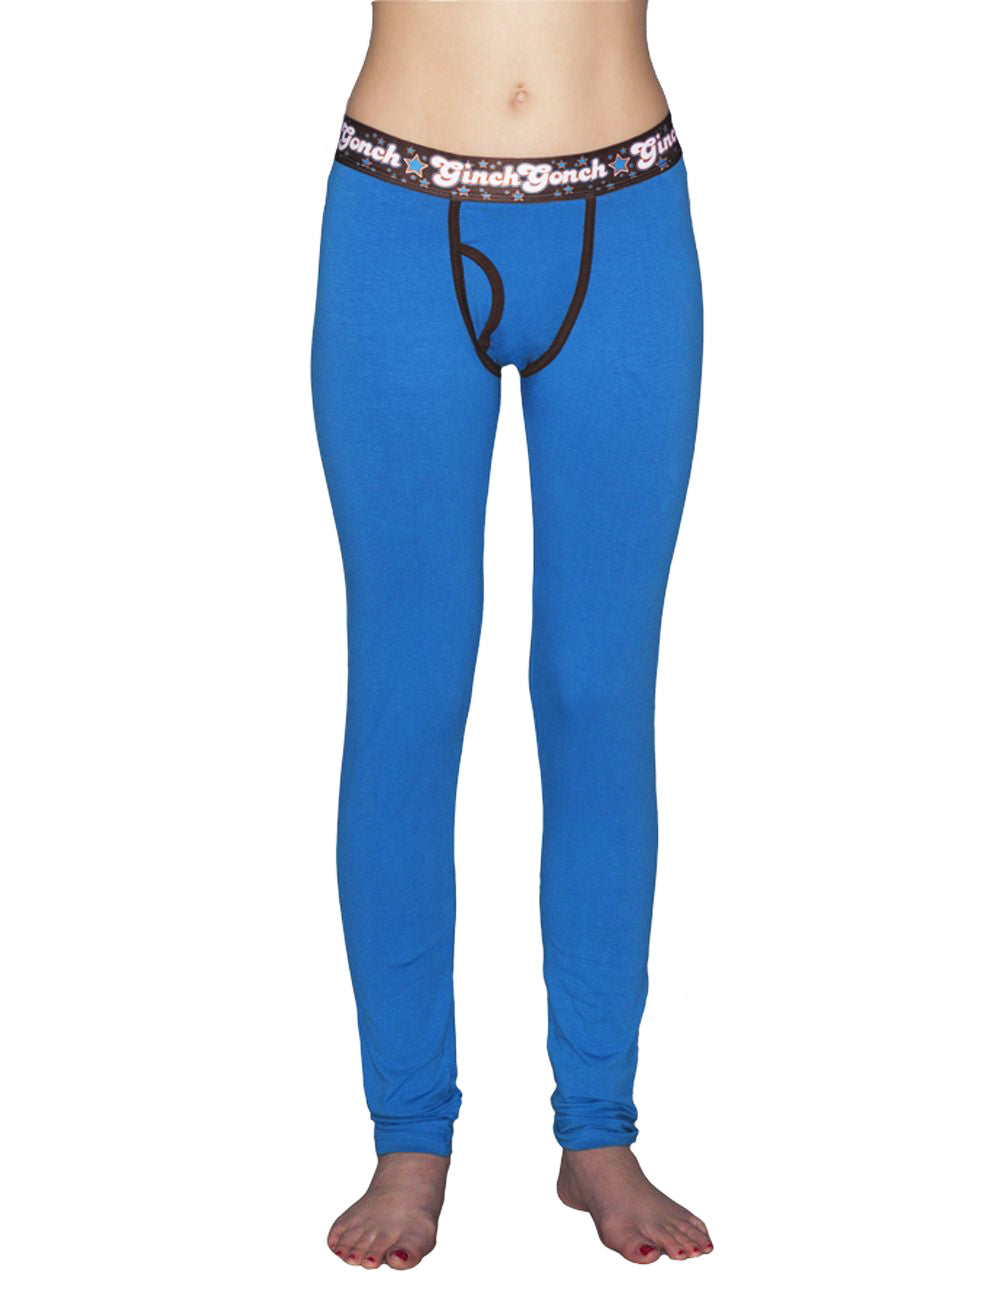 Blue Coconuts Leggings – Ginch Gonch